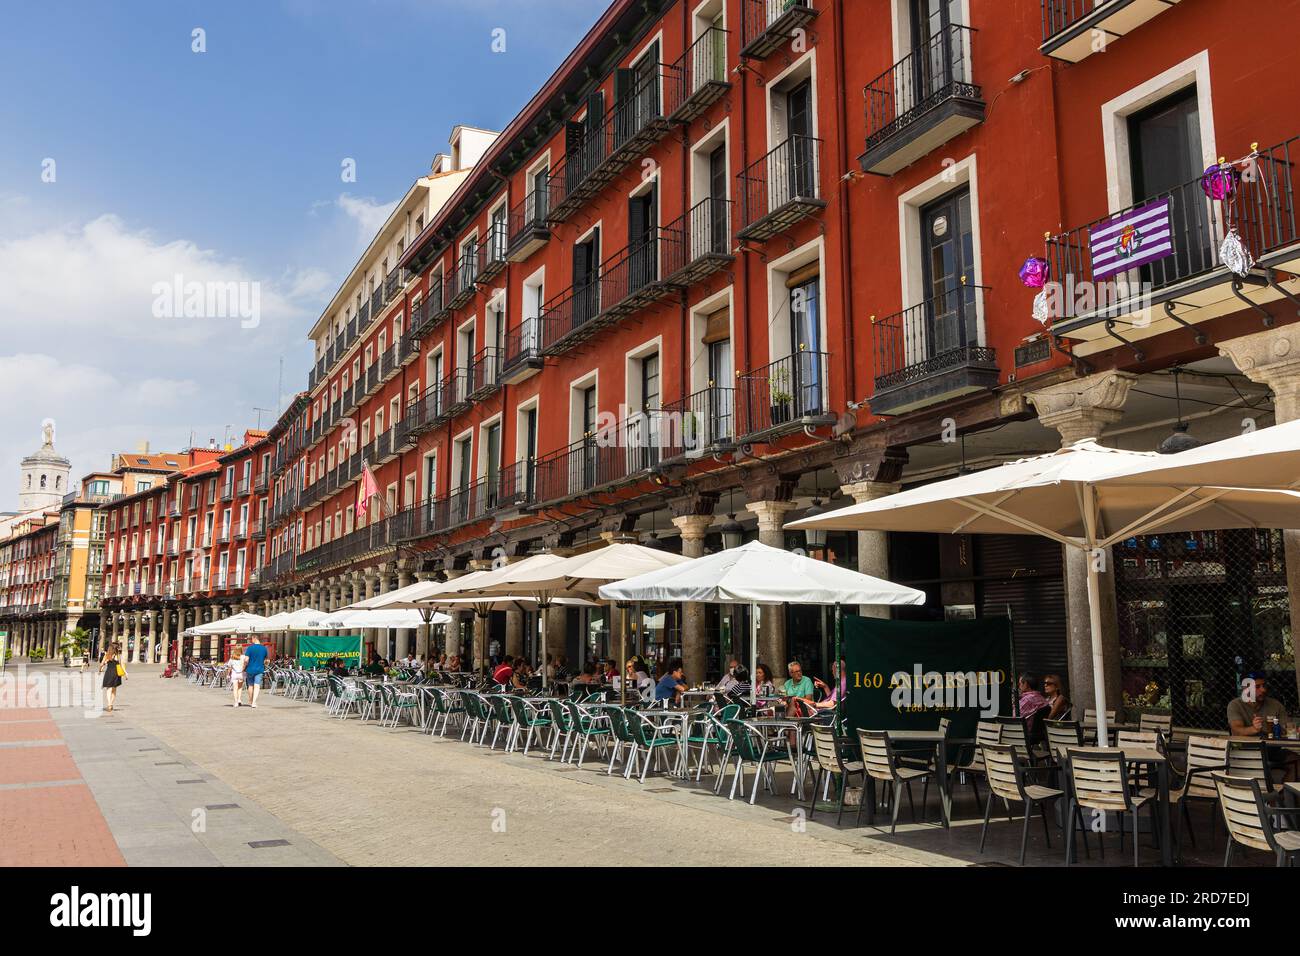 View of Plaza Mayor, central square, with its historic beautiful red buildings during the sunny day. Valladolid, Castilla y León, Spain. Stock Photo